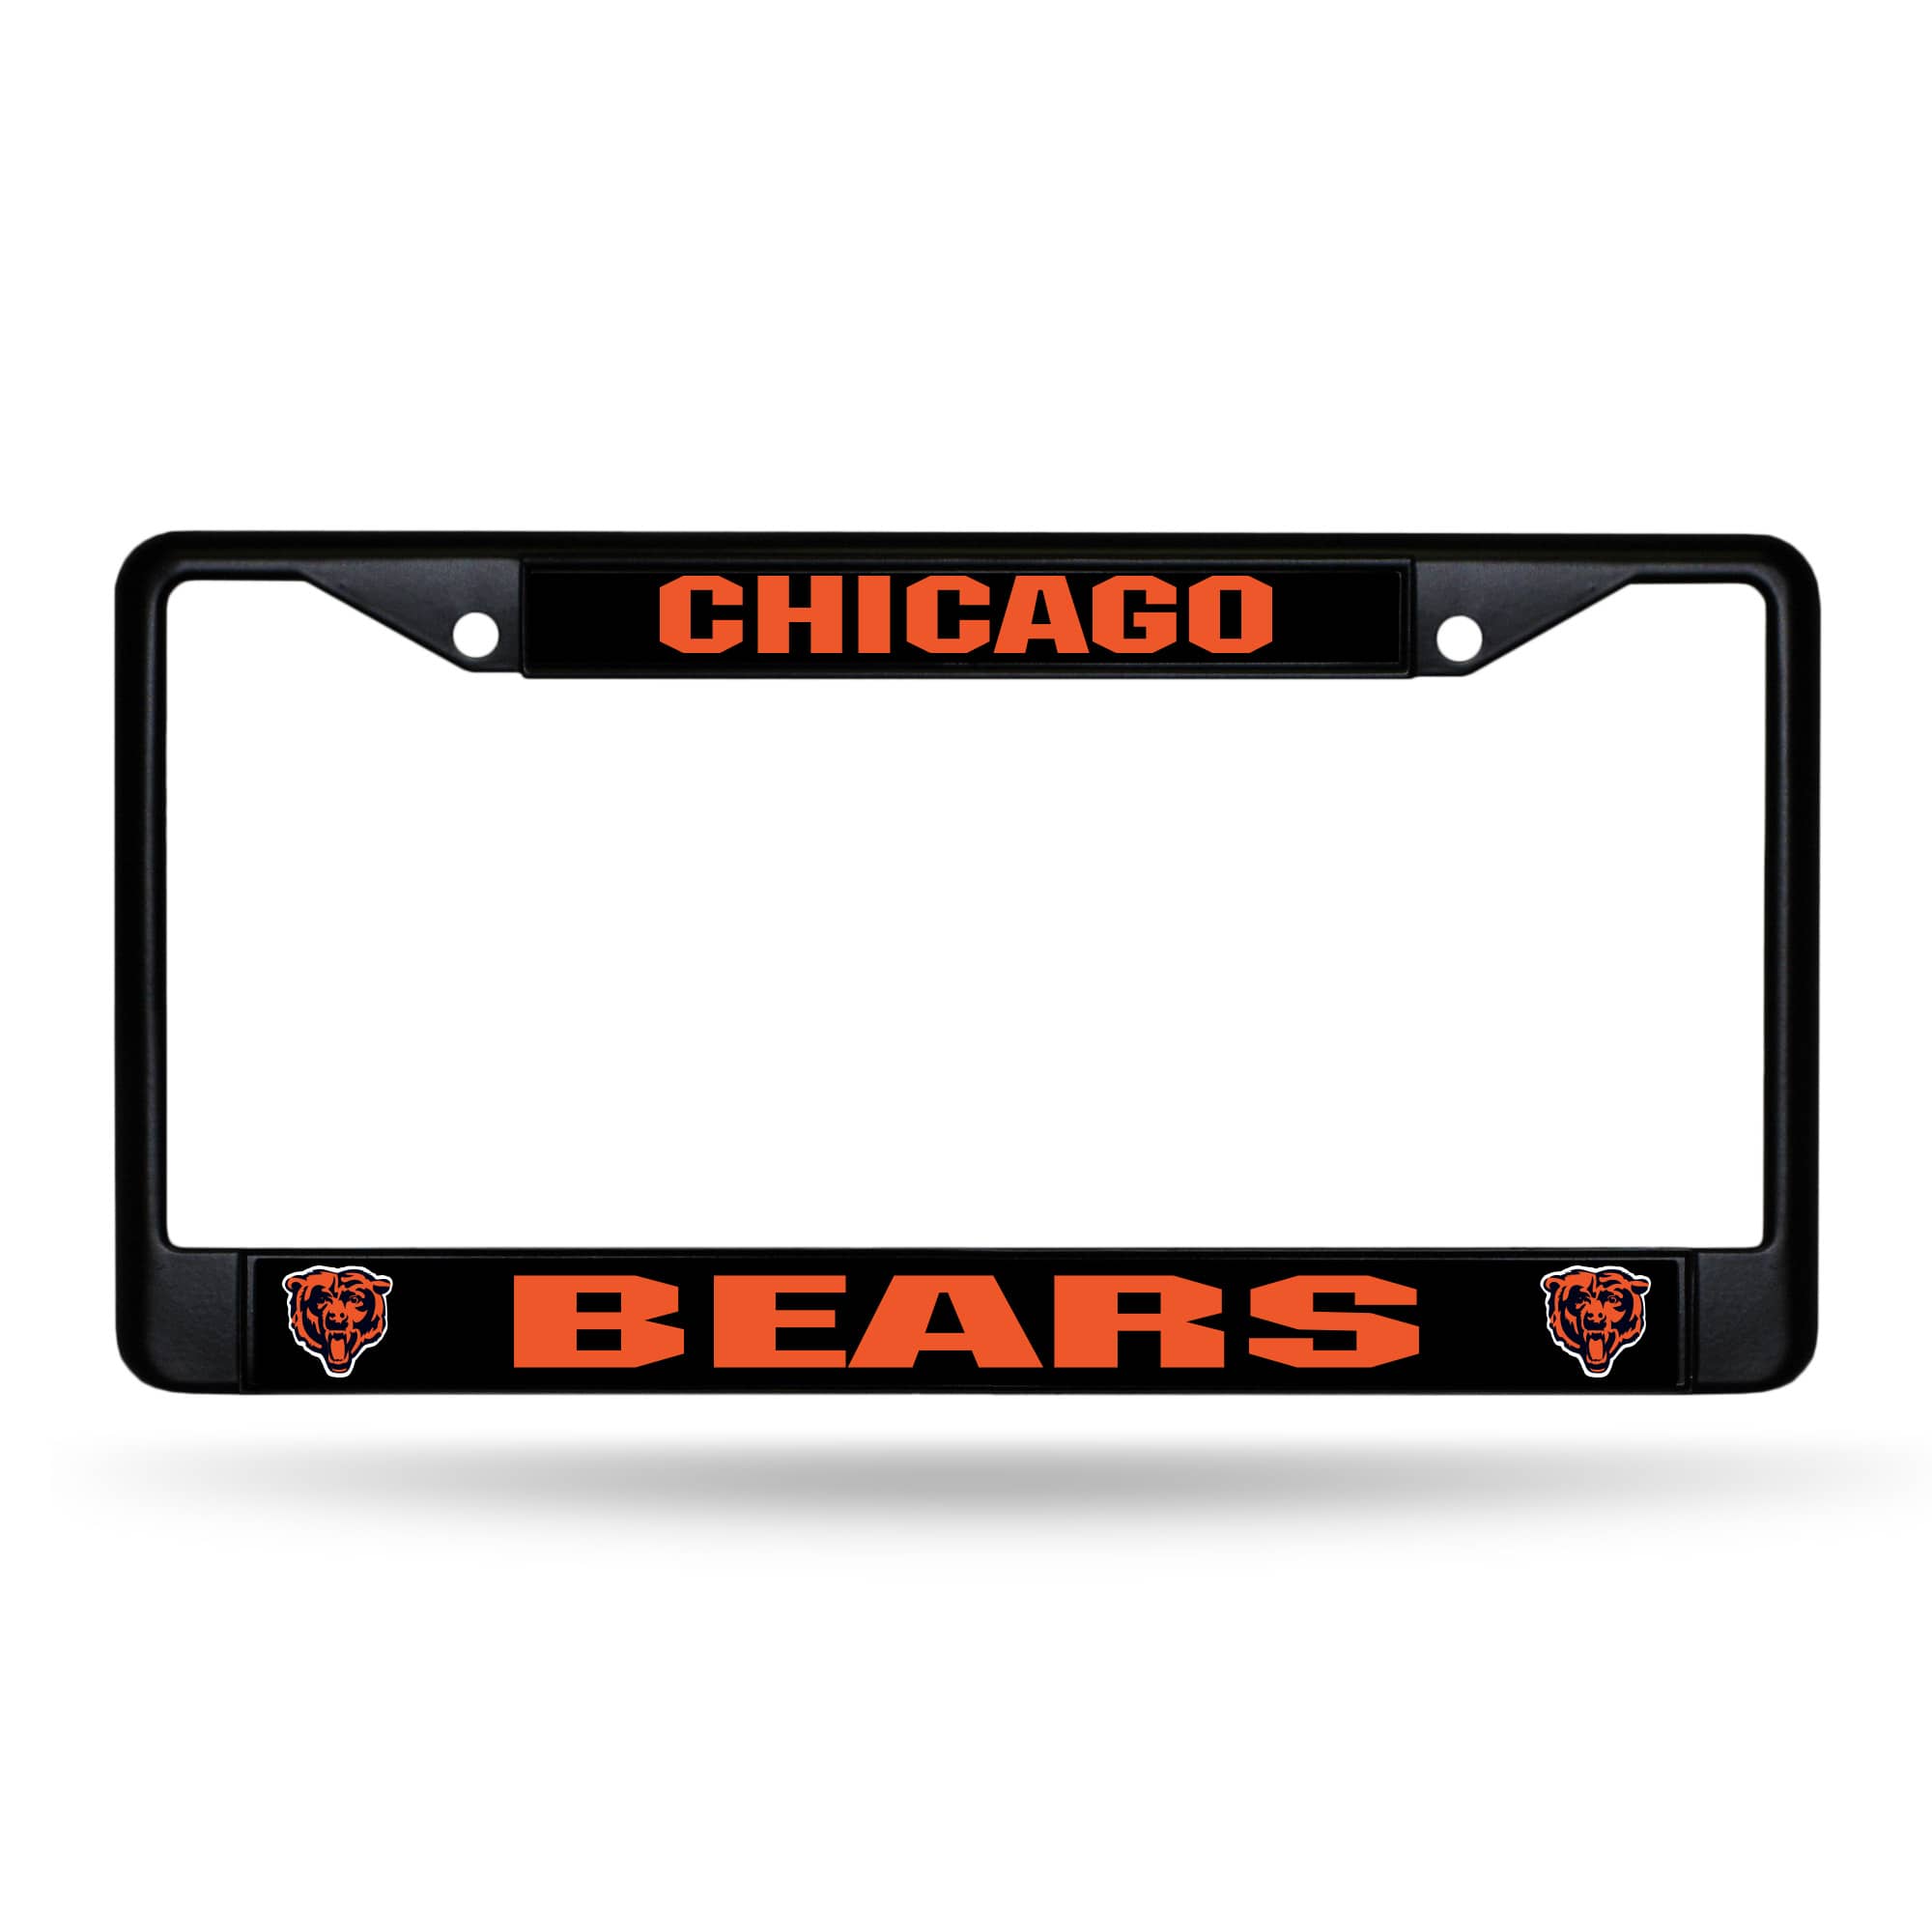 Rico 6" x 12" Black and Orange NFL Chicago Bears License Plate Cover